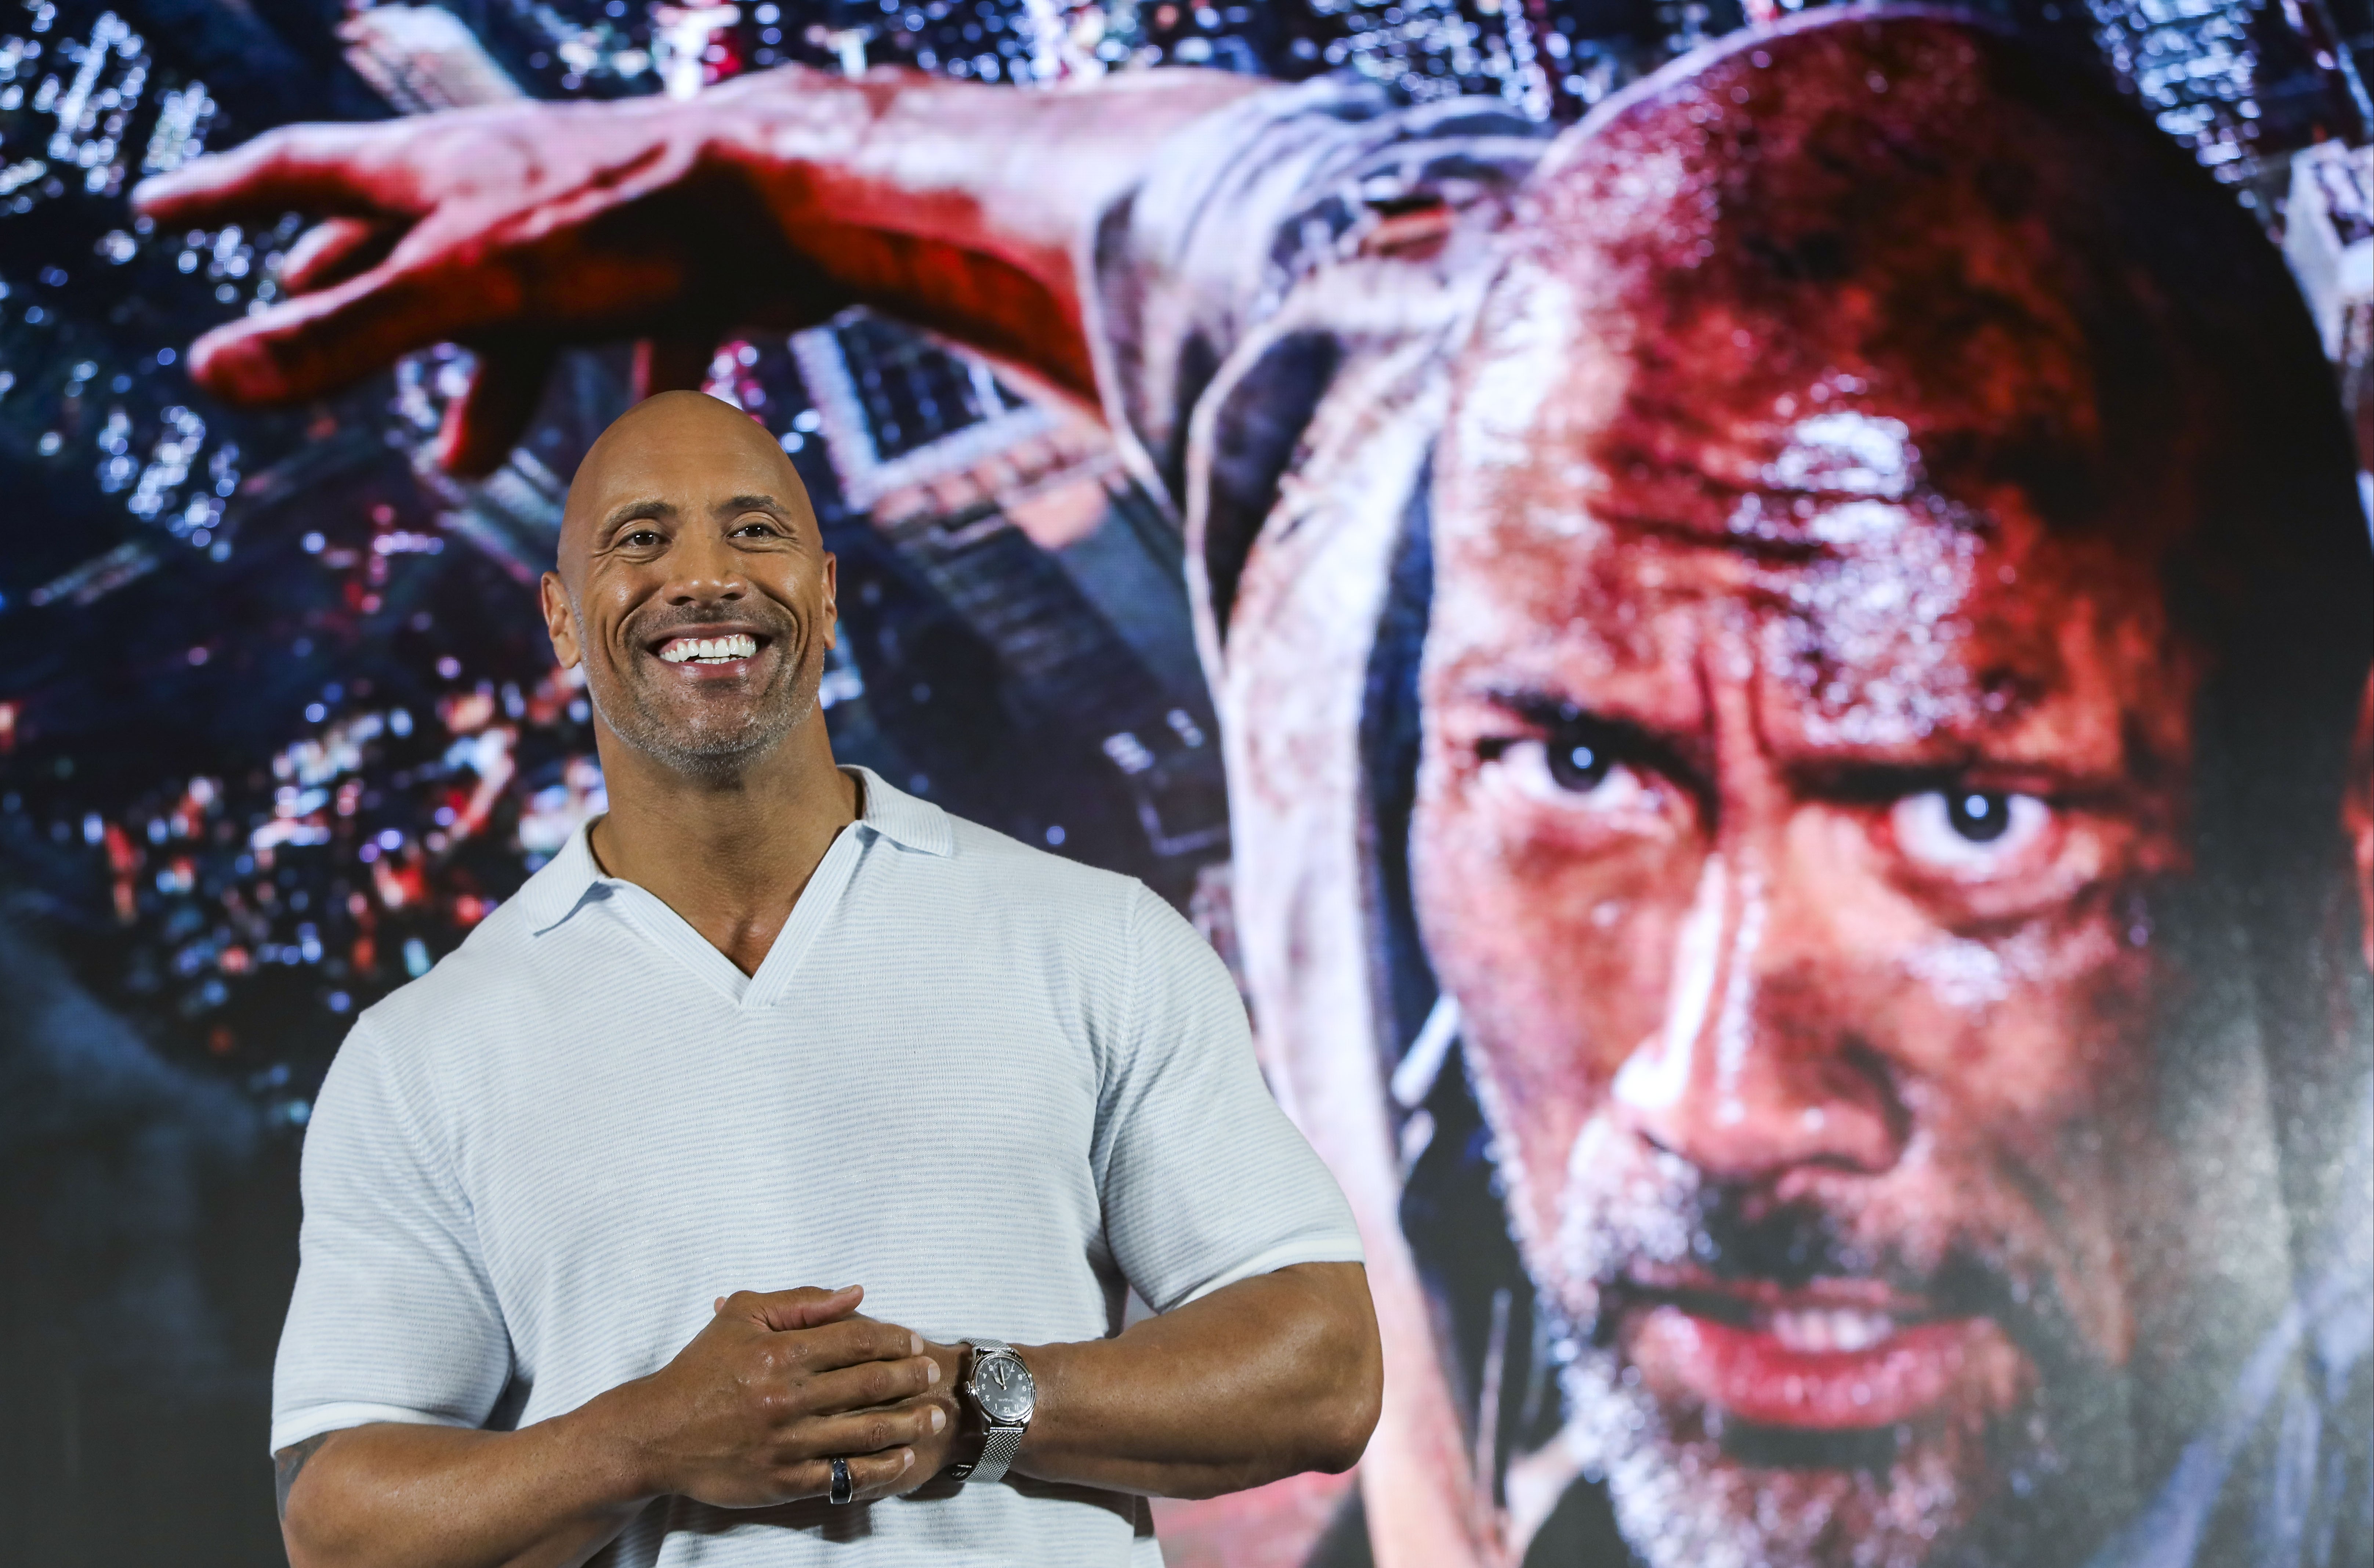 Towering ex-wrestler Dwayne Johnson calls time he spent with amputees preparing to film thriller ‘unforgettable’; co-star Chin Han talks up the attention producers paid to detail to ensure film’s authentic Hong Kong look